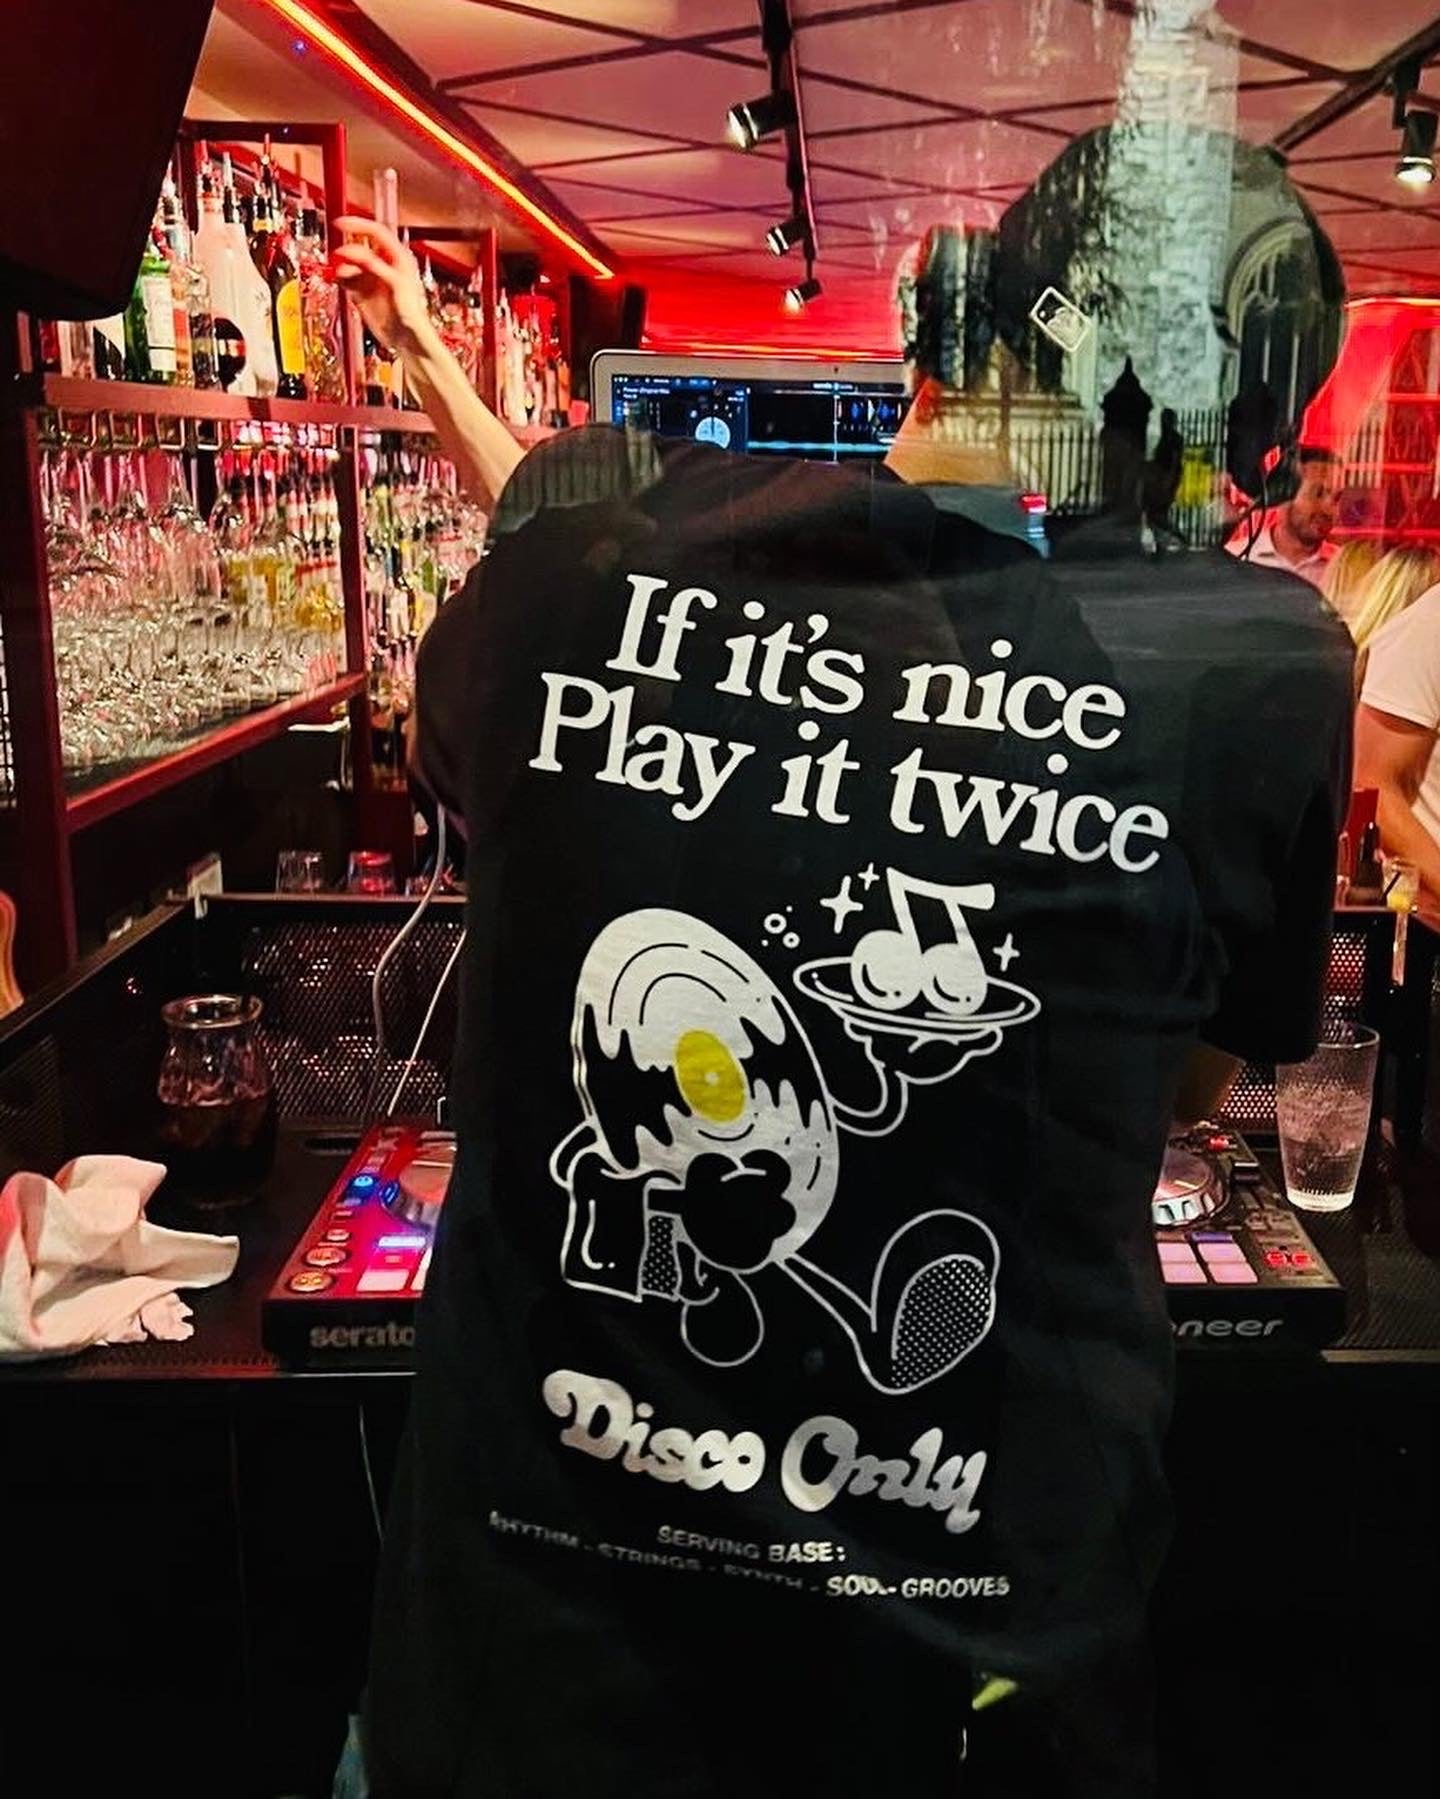 DISCO ONLY 'Play it Twice V2' Tee - Black